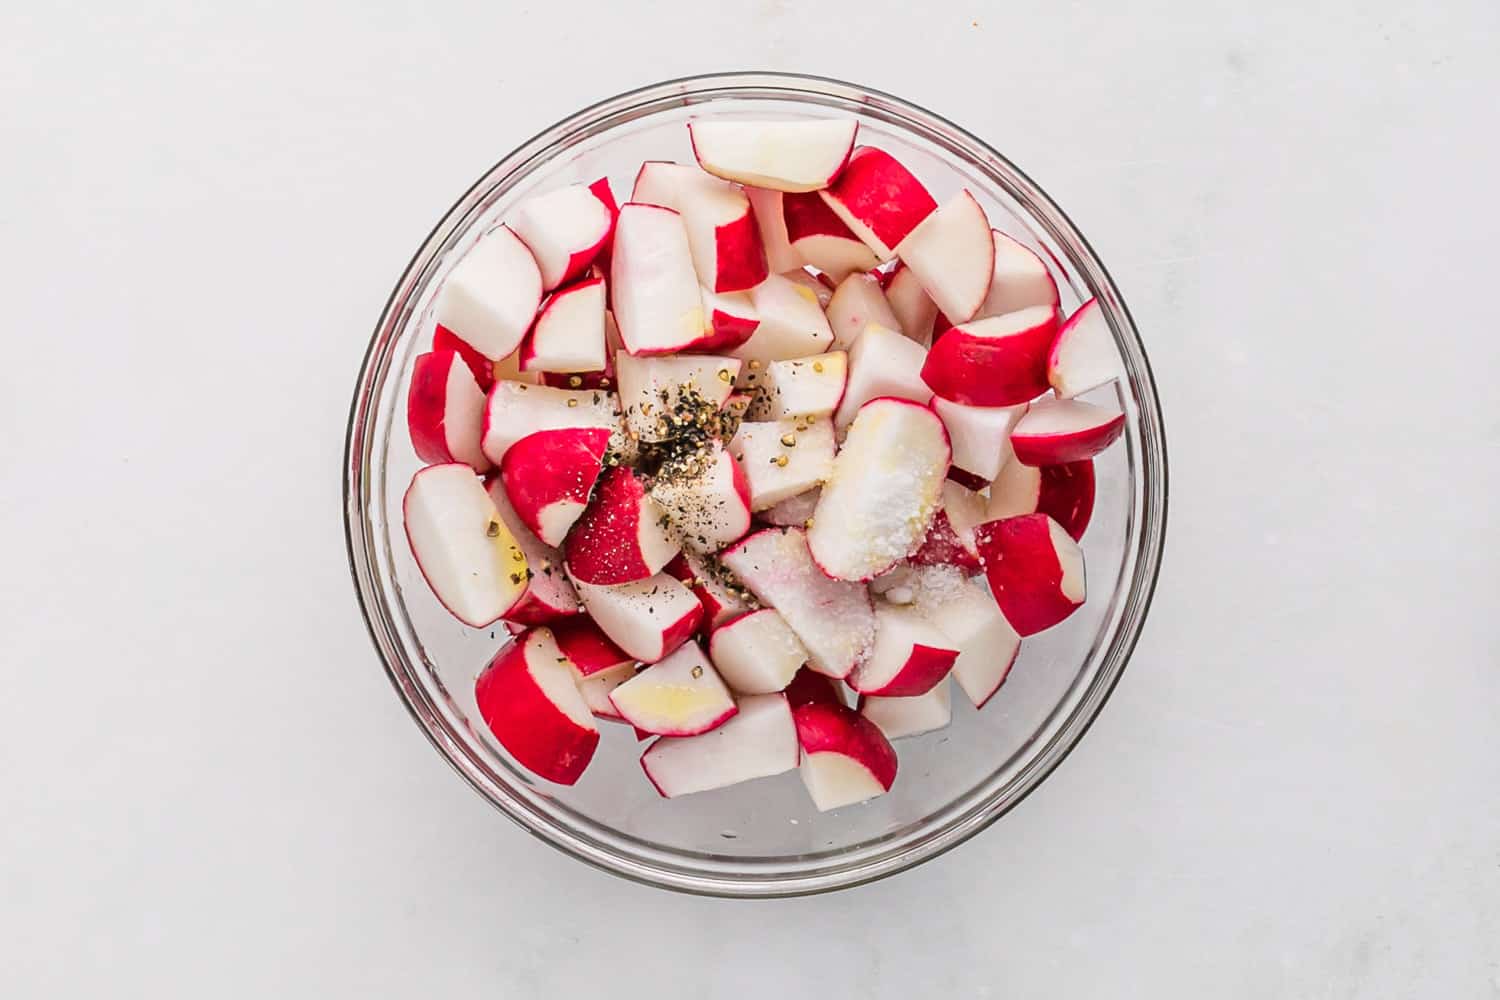 Radishes cut in half and mixed with salt and pepper.